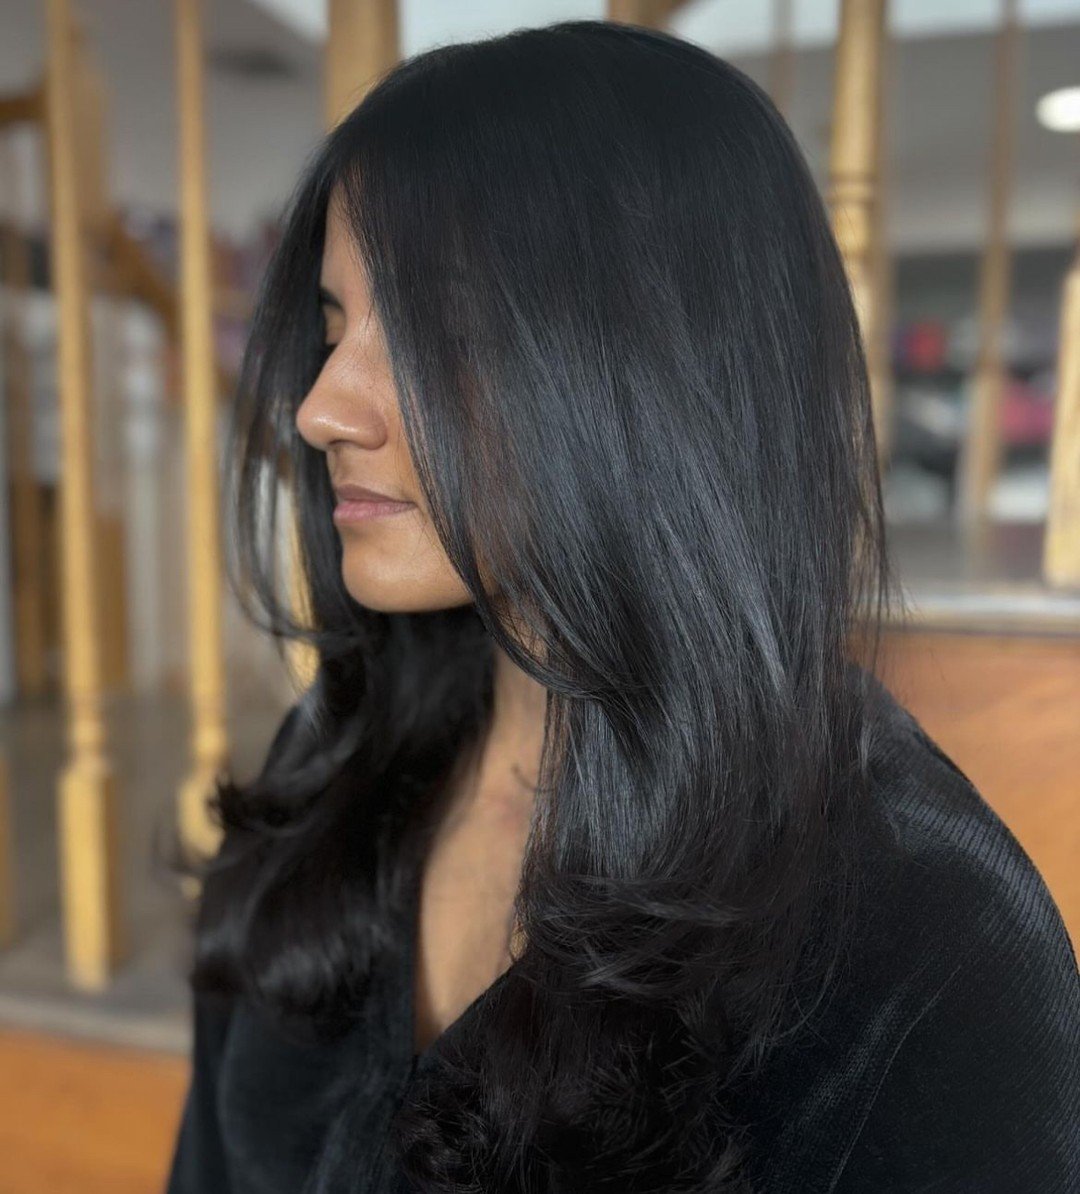 This is the haircut you need if you're looking to add volume! 🦋

The Butterfly Cut gives you all the layers that add volume and bounce, but you don't have to sacrifice the length of your hair.

It's easy to style, looks great straight or curly and i